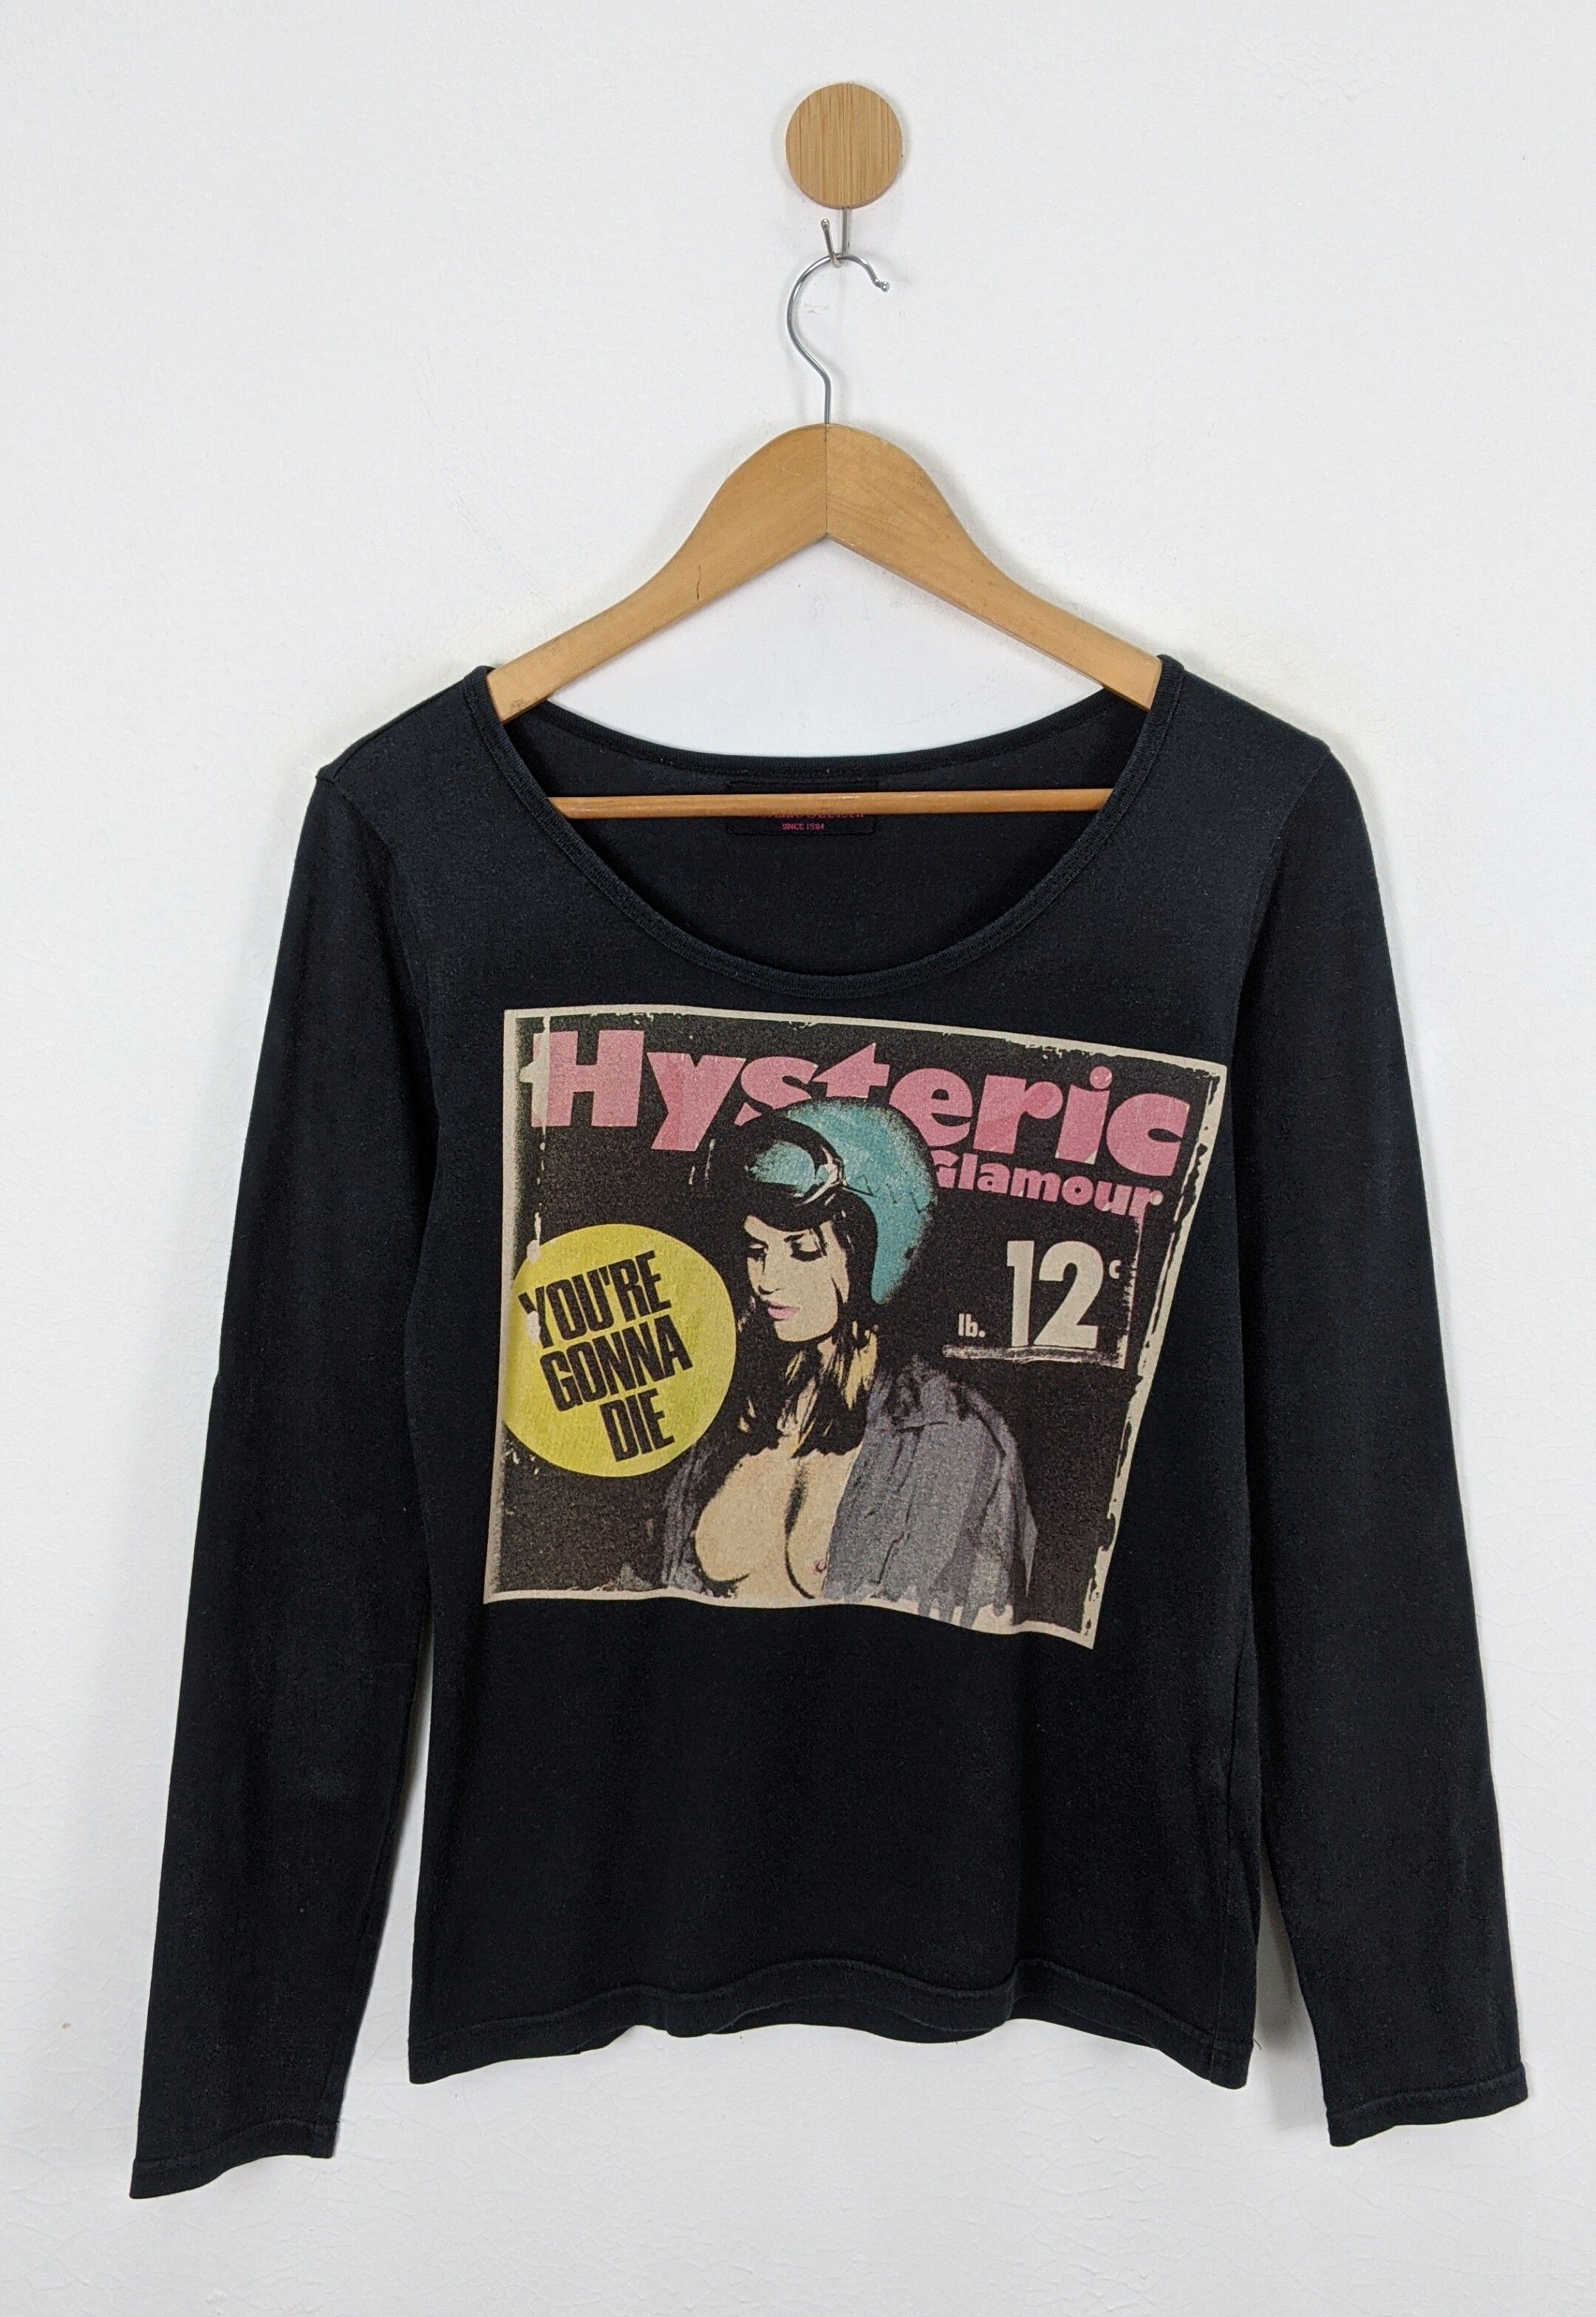 Hysteric Glamour You're Gonna Die shirt - 1